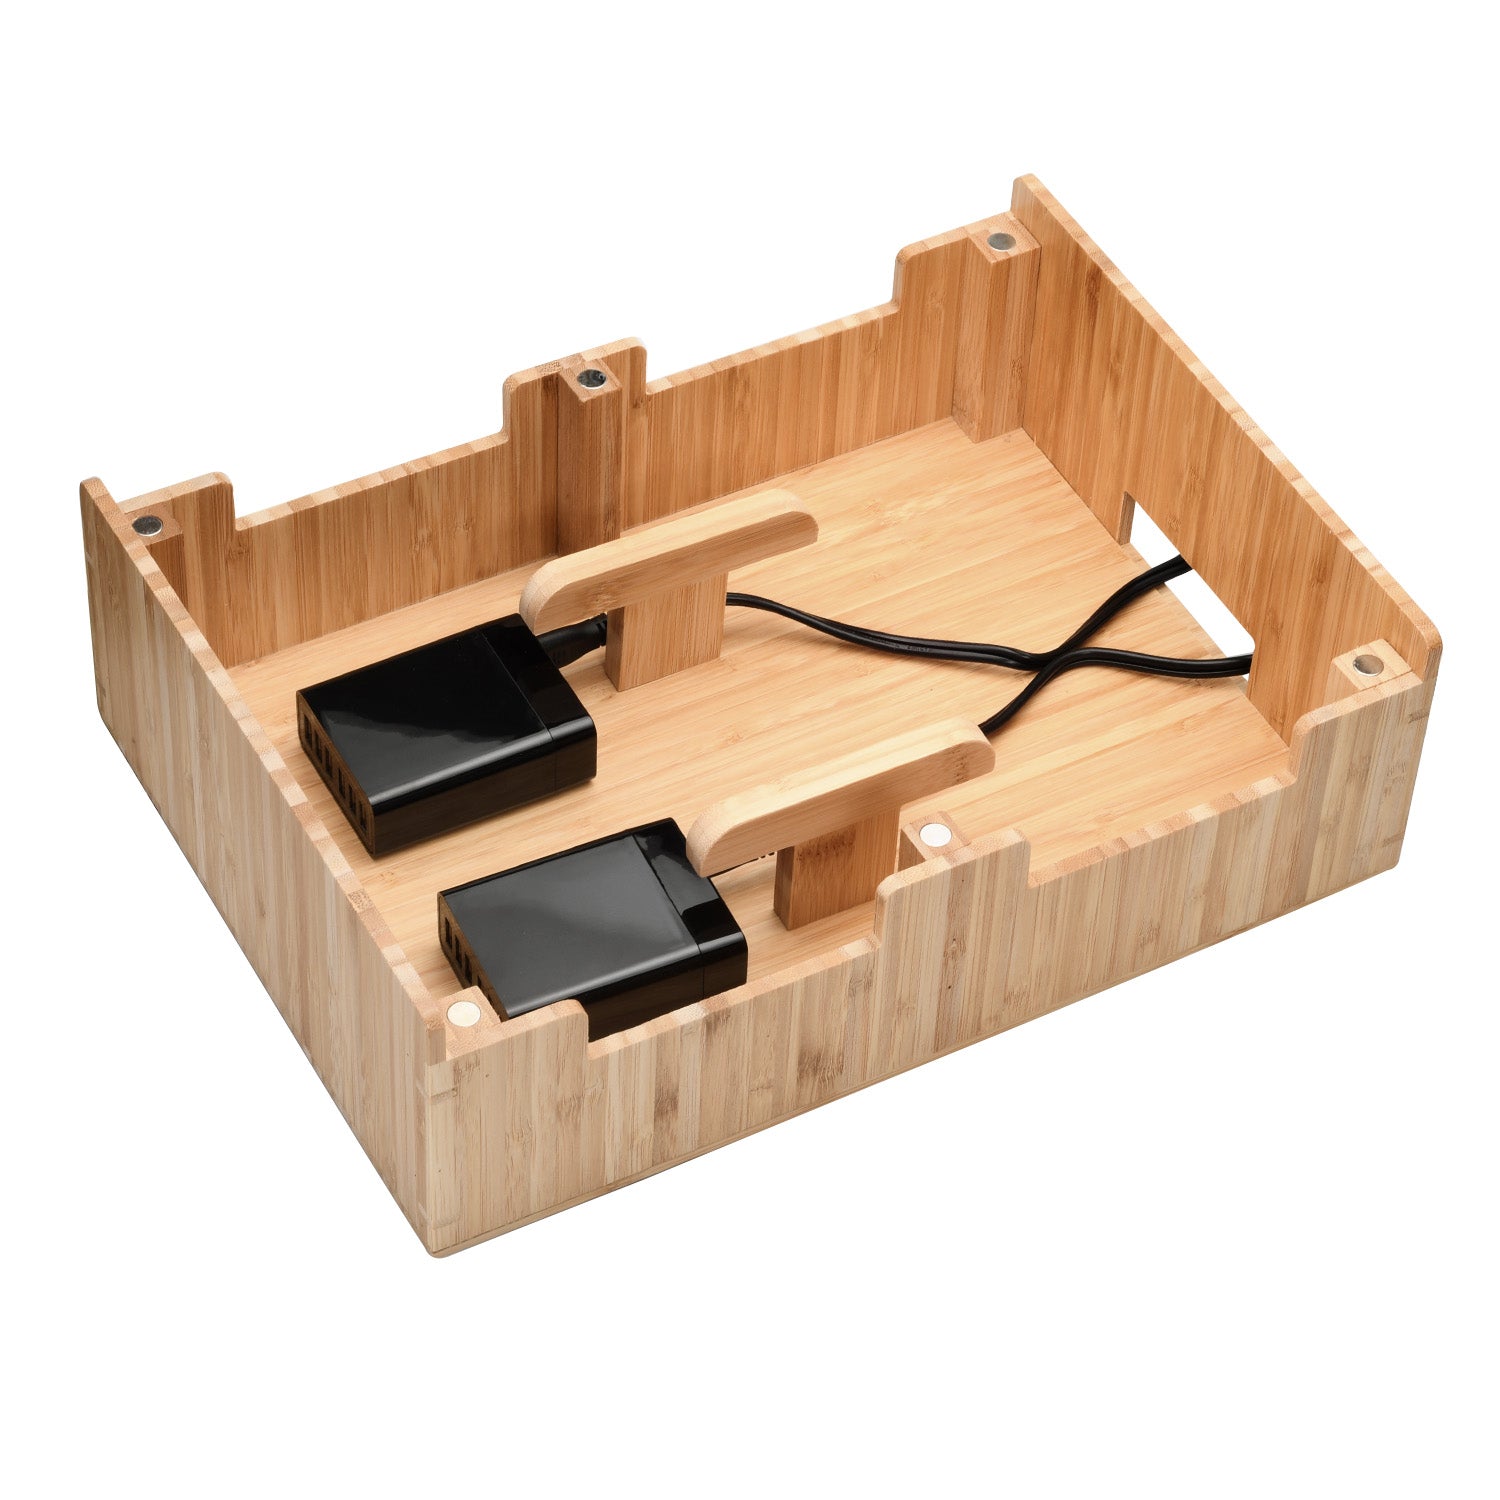 Bamboo 10 Port Charging Station with 2 Powermod 6 Port USB Chargers